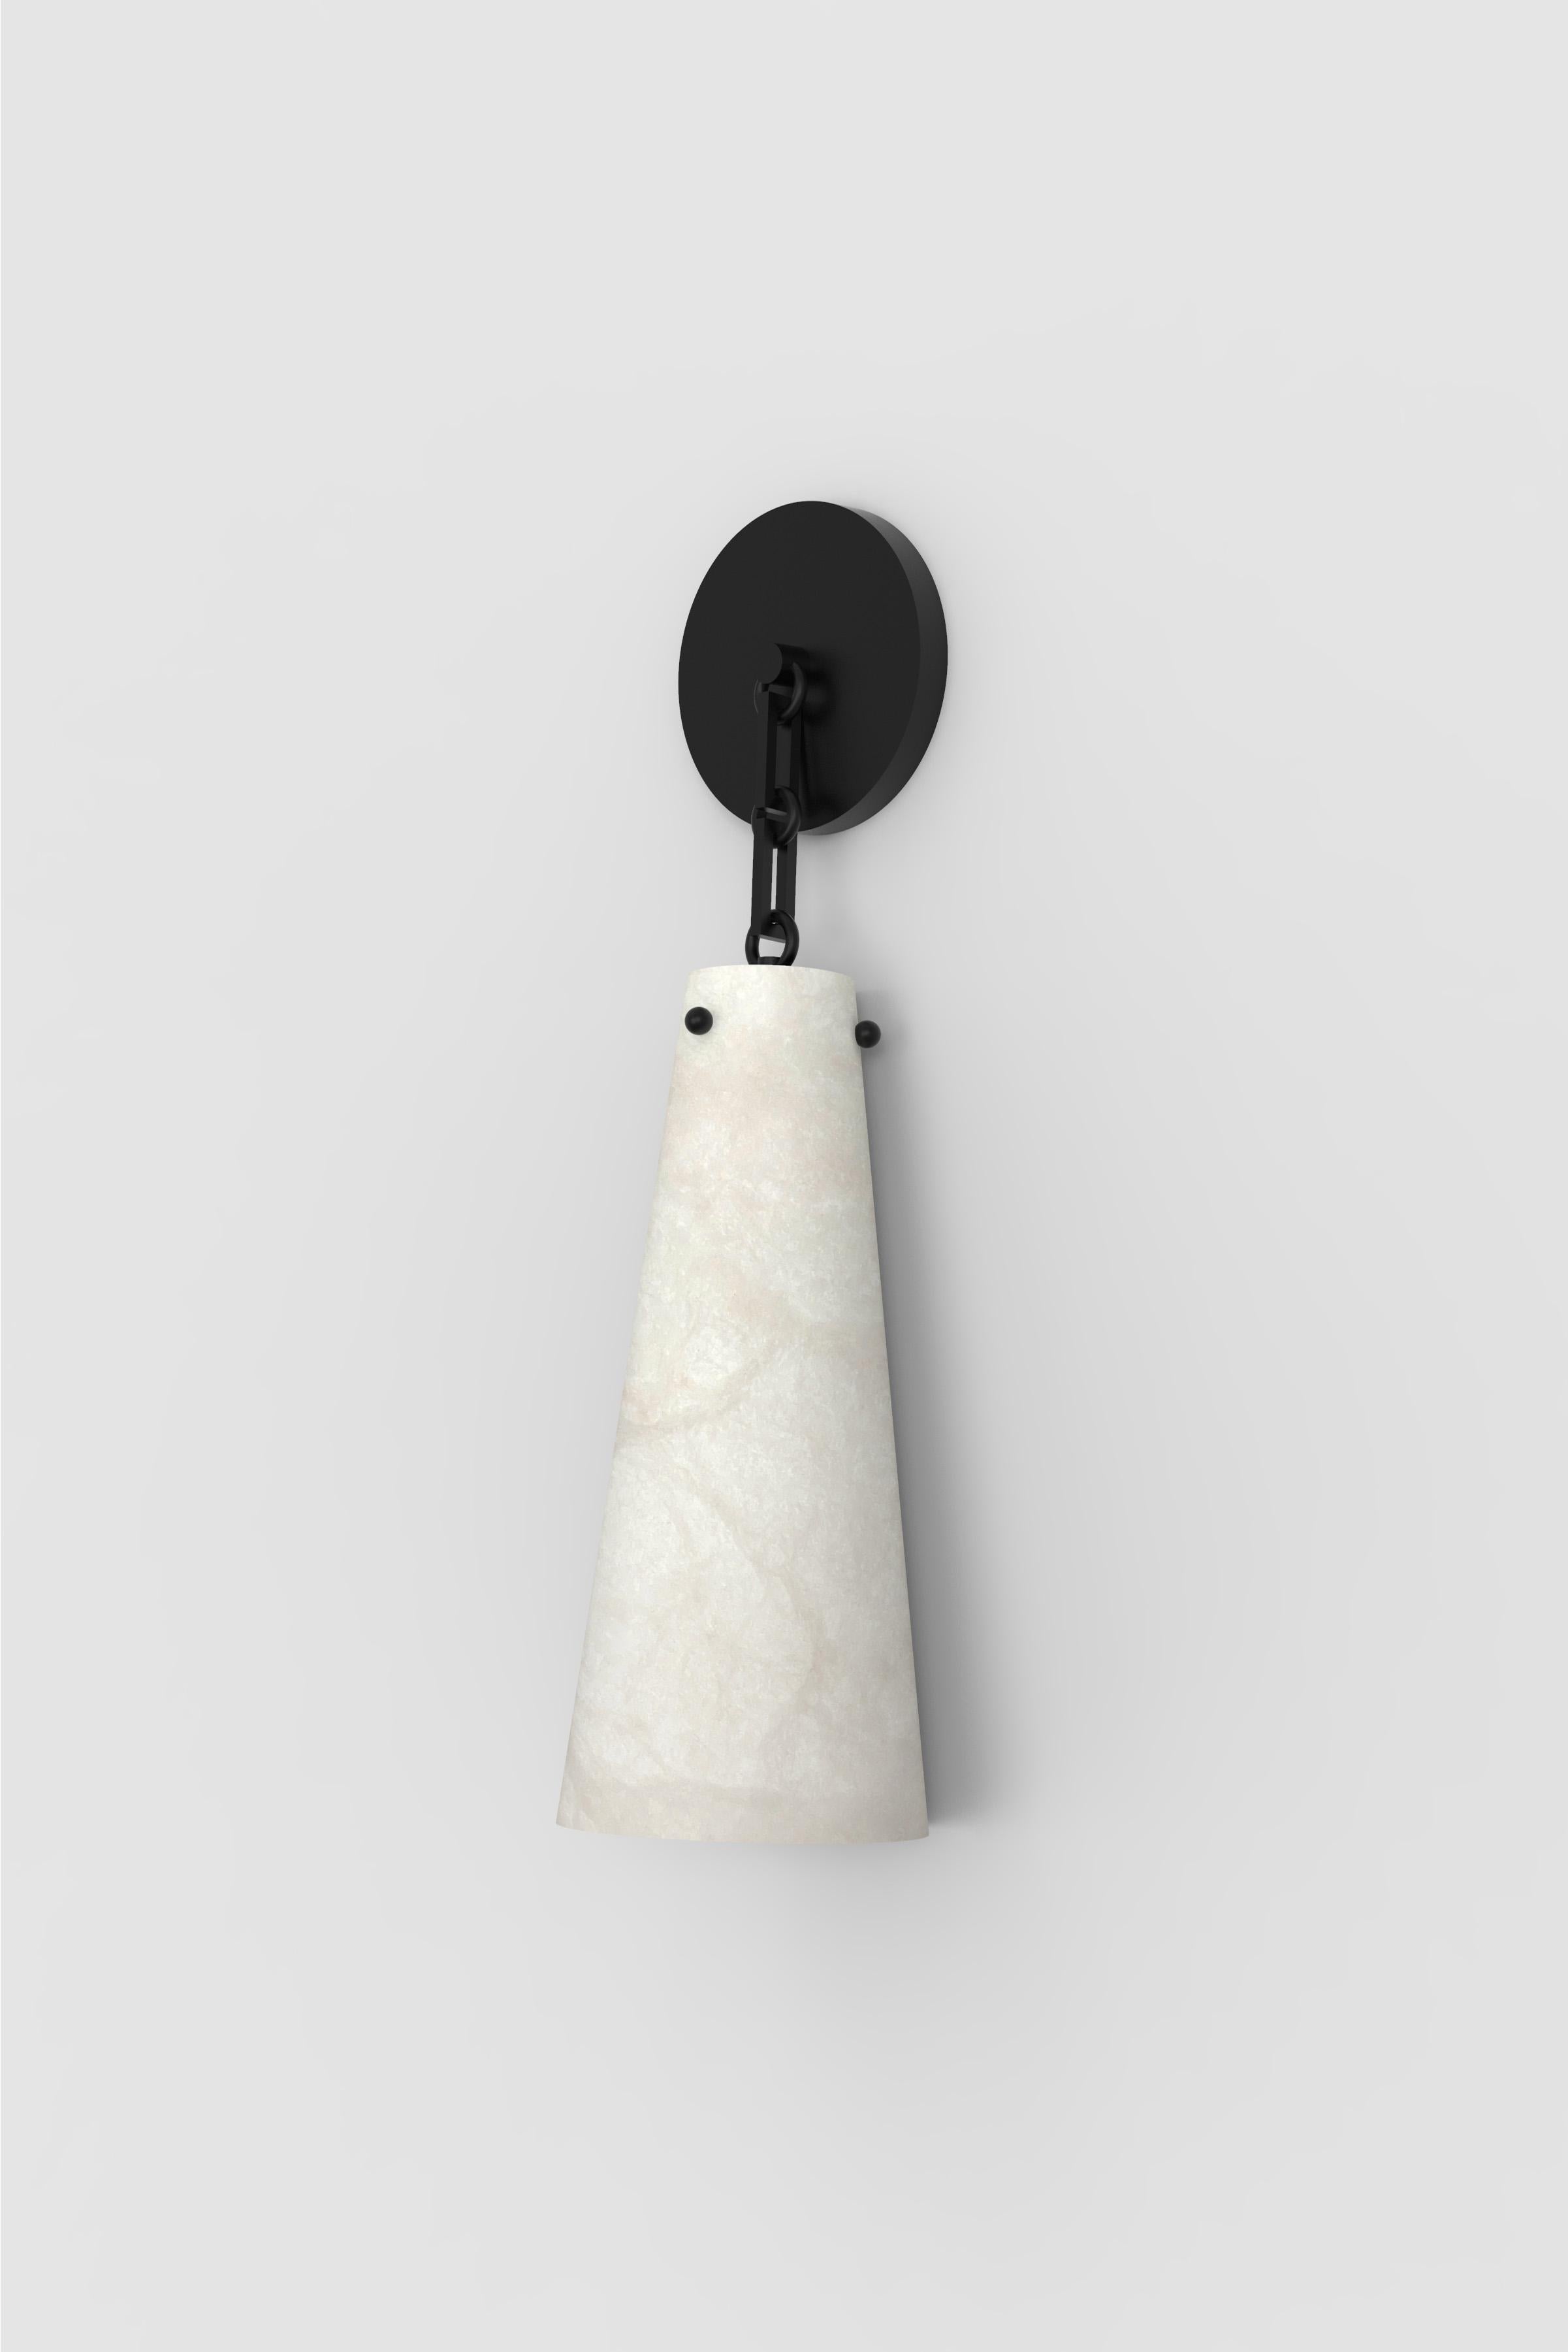 Orphan Work 202A Sconce BLK, 2021
Shown in alabaster with blackened brass
Available in brushed brass and blackened brass
Measures: 24” H x 6 1/2” W x 6” D
Canopy 6